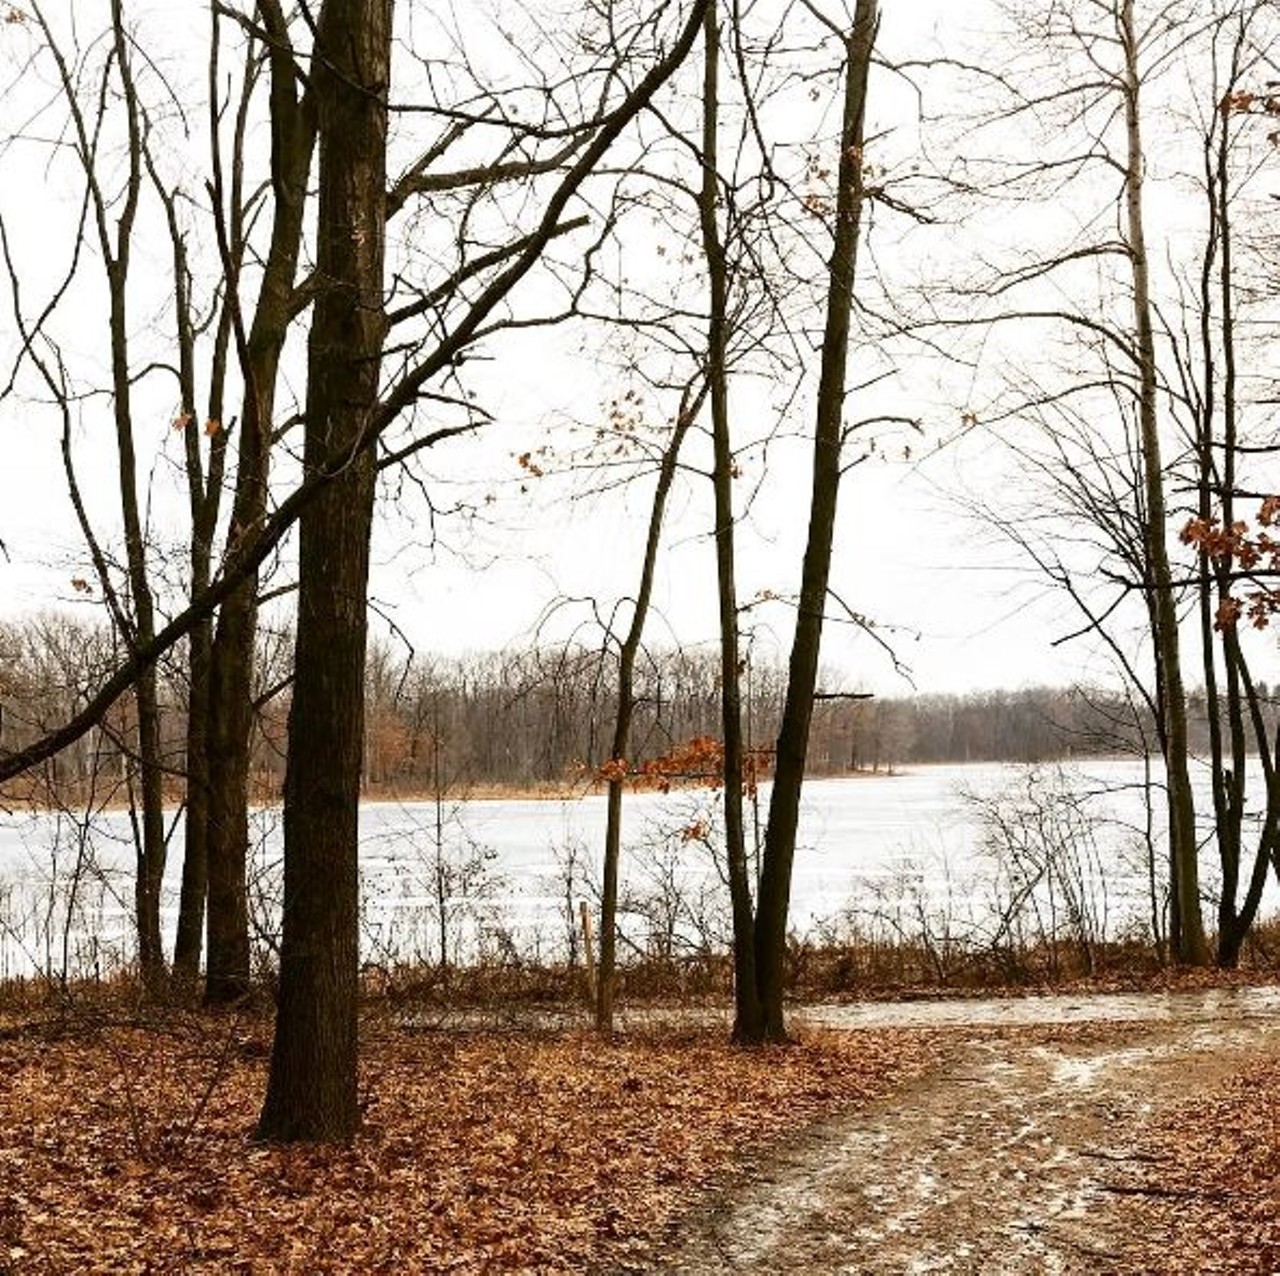 Independence Oaks Park
Clarkston
Aside from taking your senior pictures here, there is 12-plus miles of trails for you to get lost in. How perfect?
Photo via Instagram